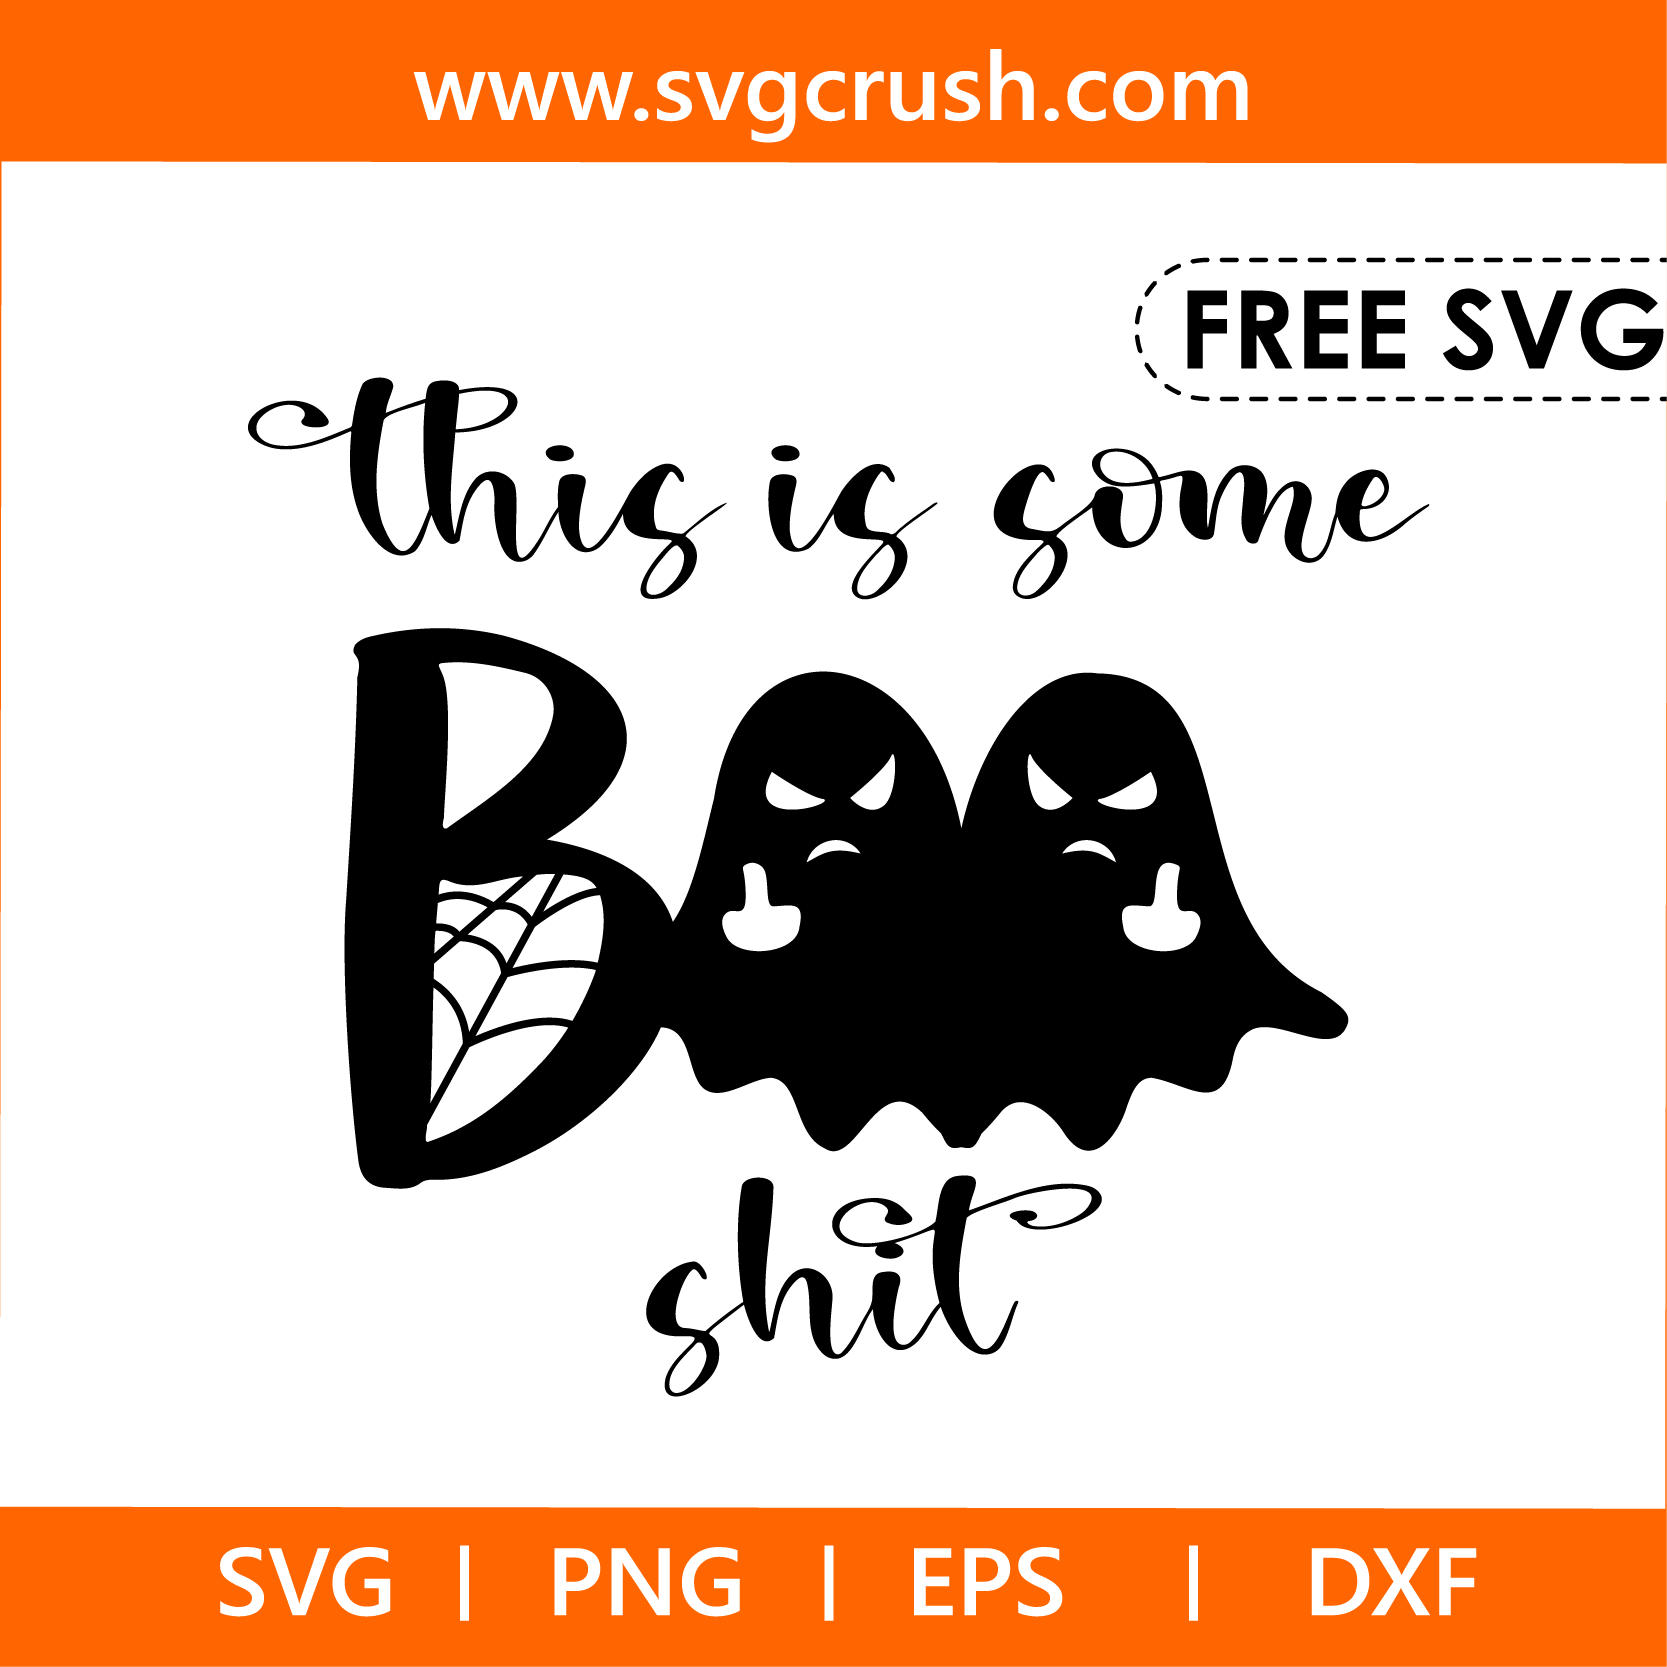 free this-is-some-boo-shit-004 svg